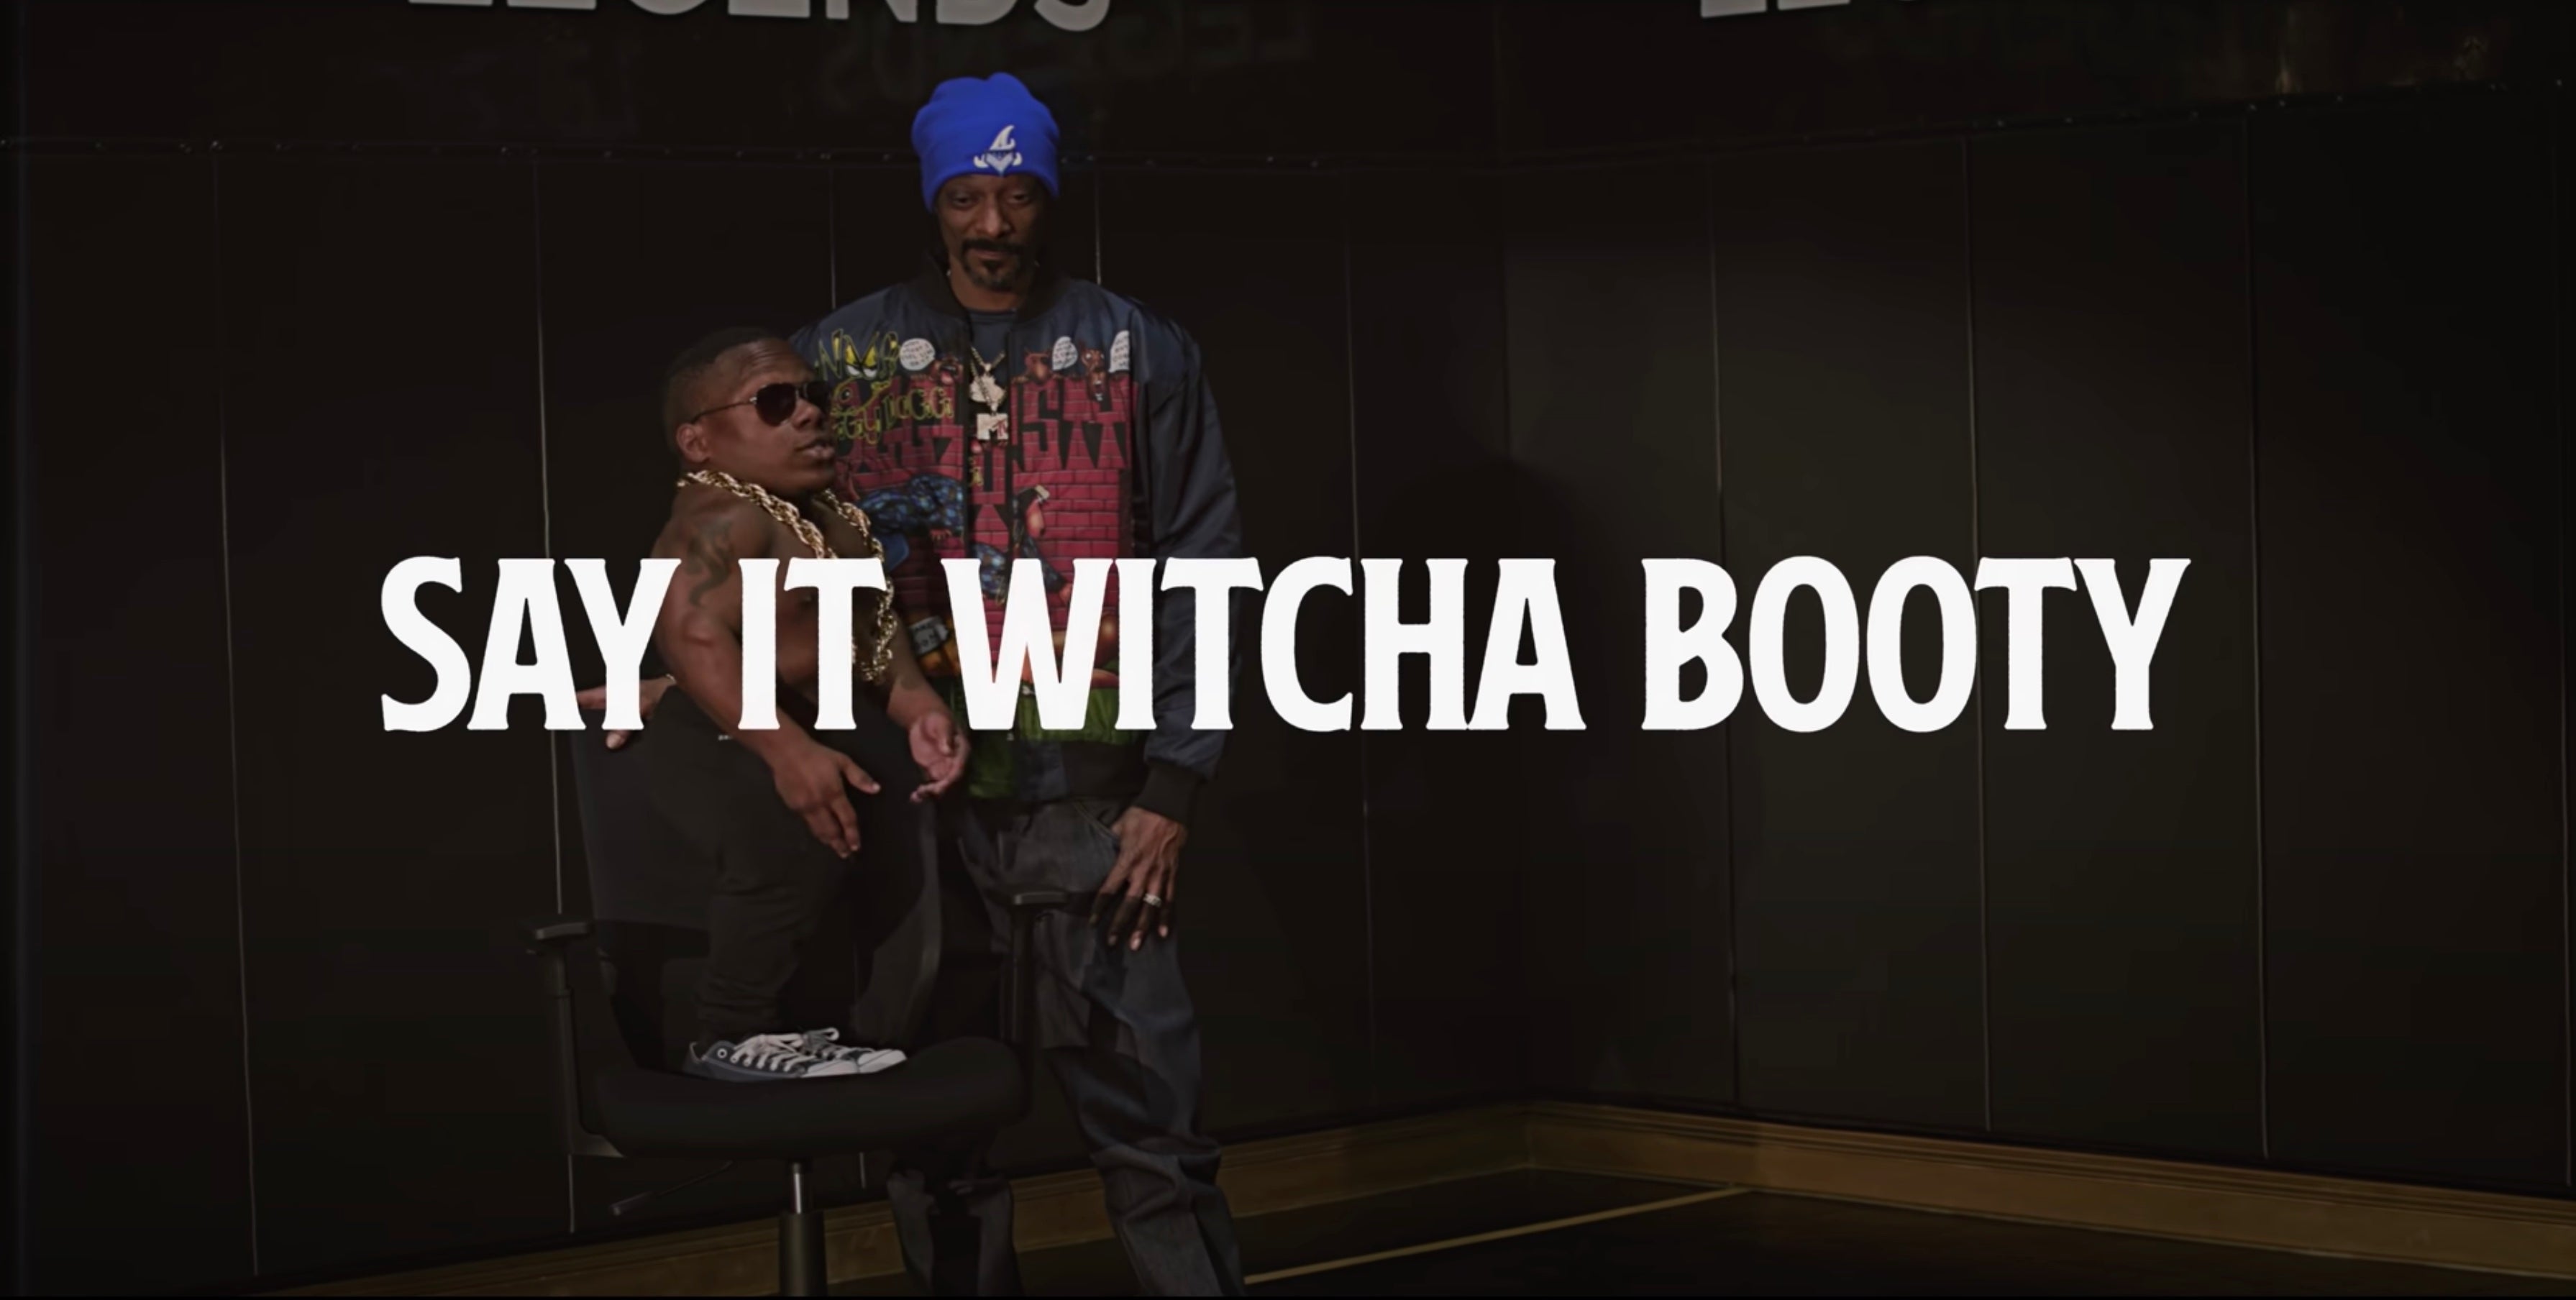 Load video: Snoop Dogg x G-Star Raw  &quot;Say it Witcha Booty&quot;  Produced by ProHoeZak